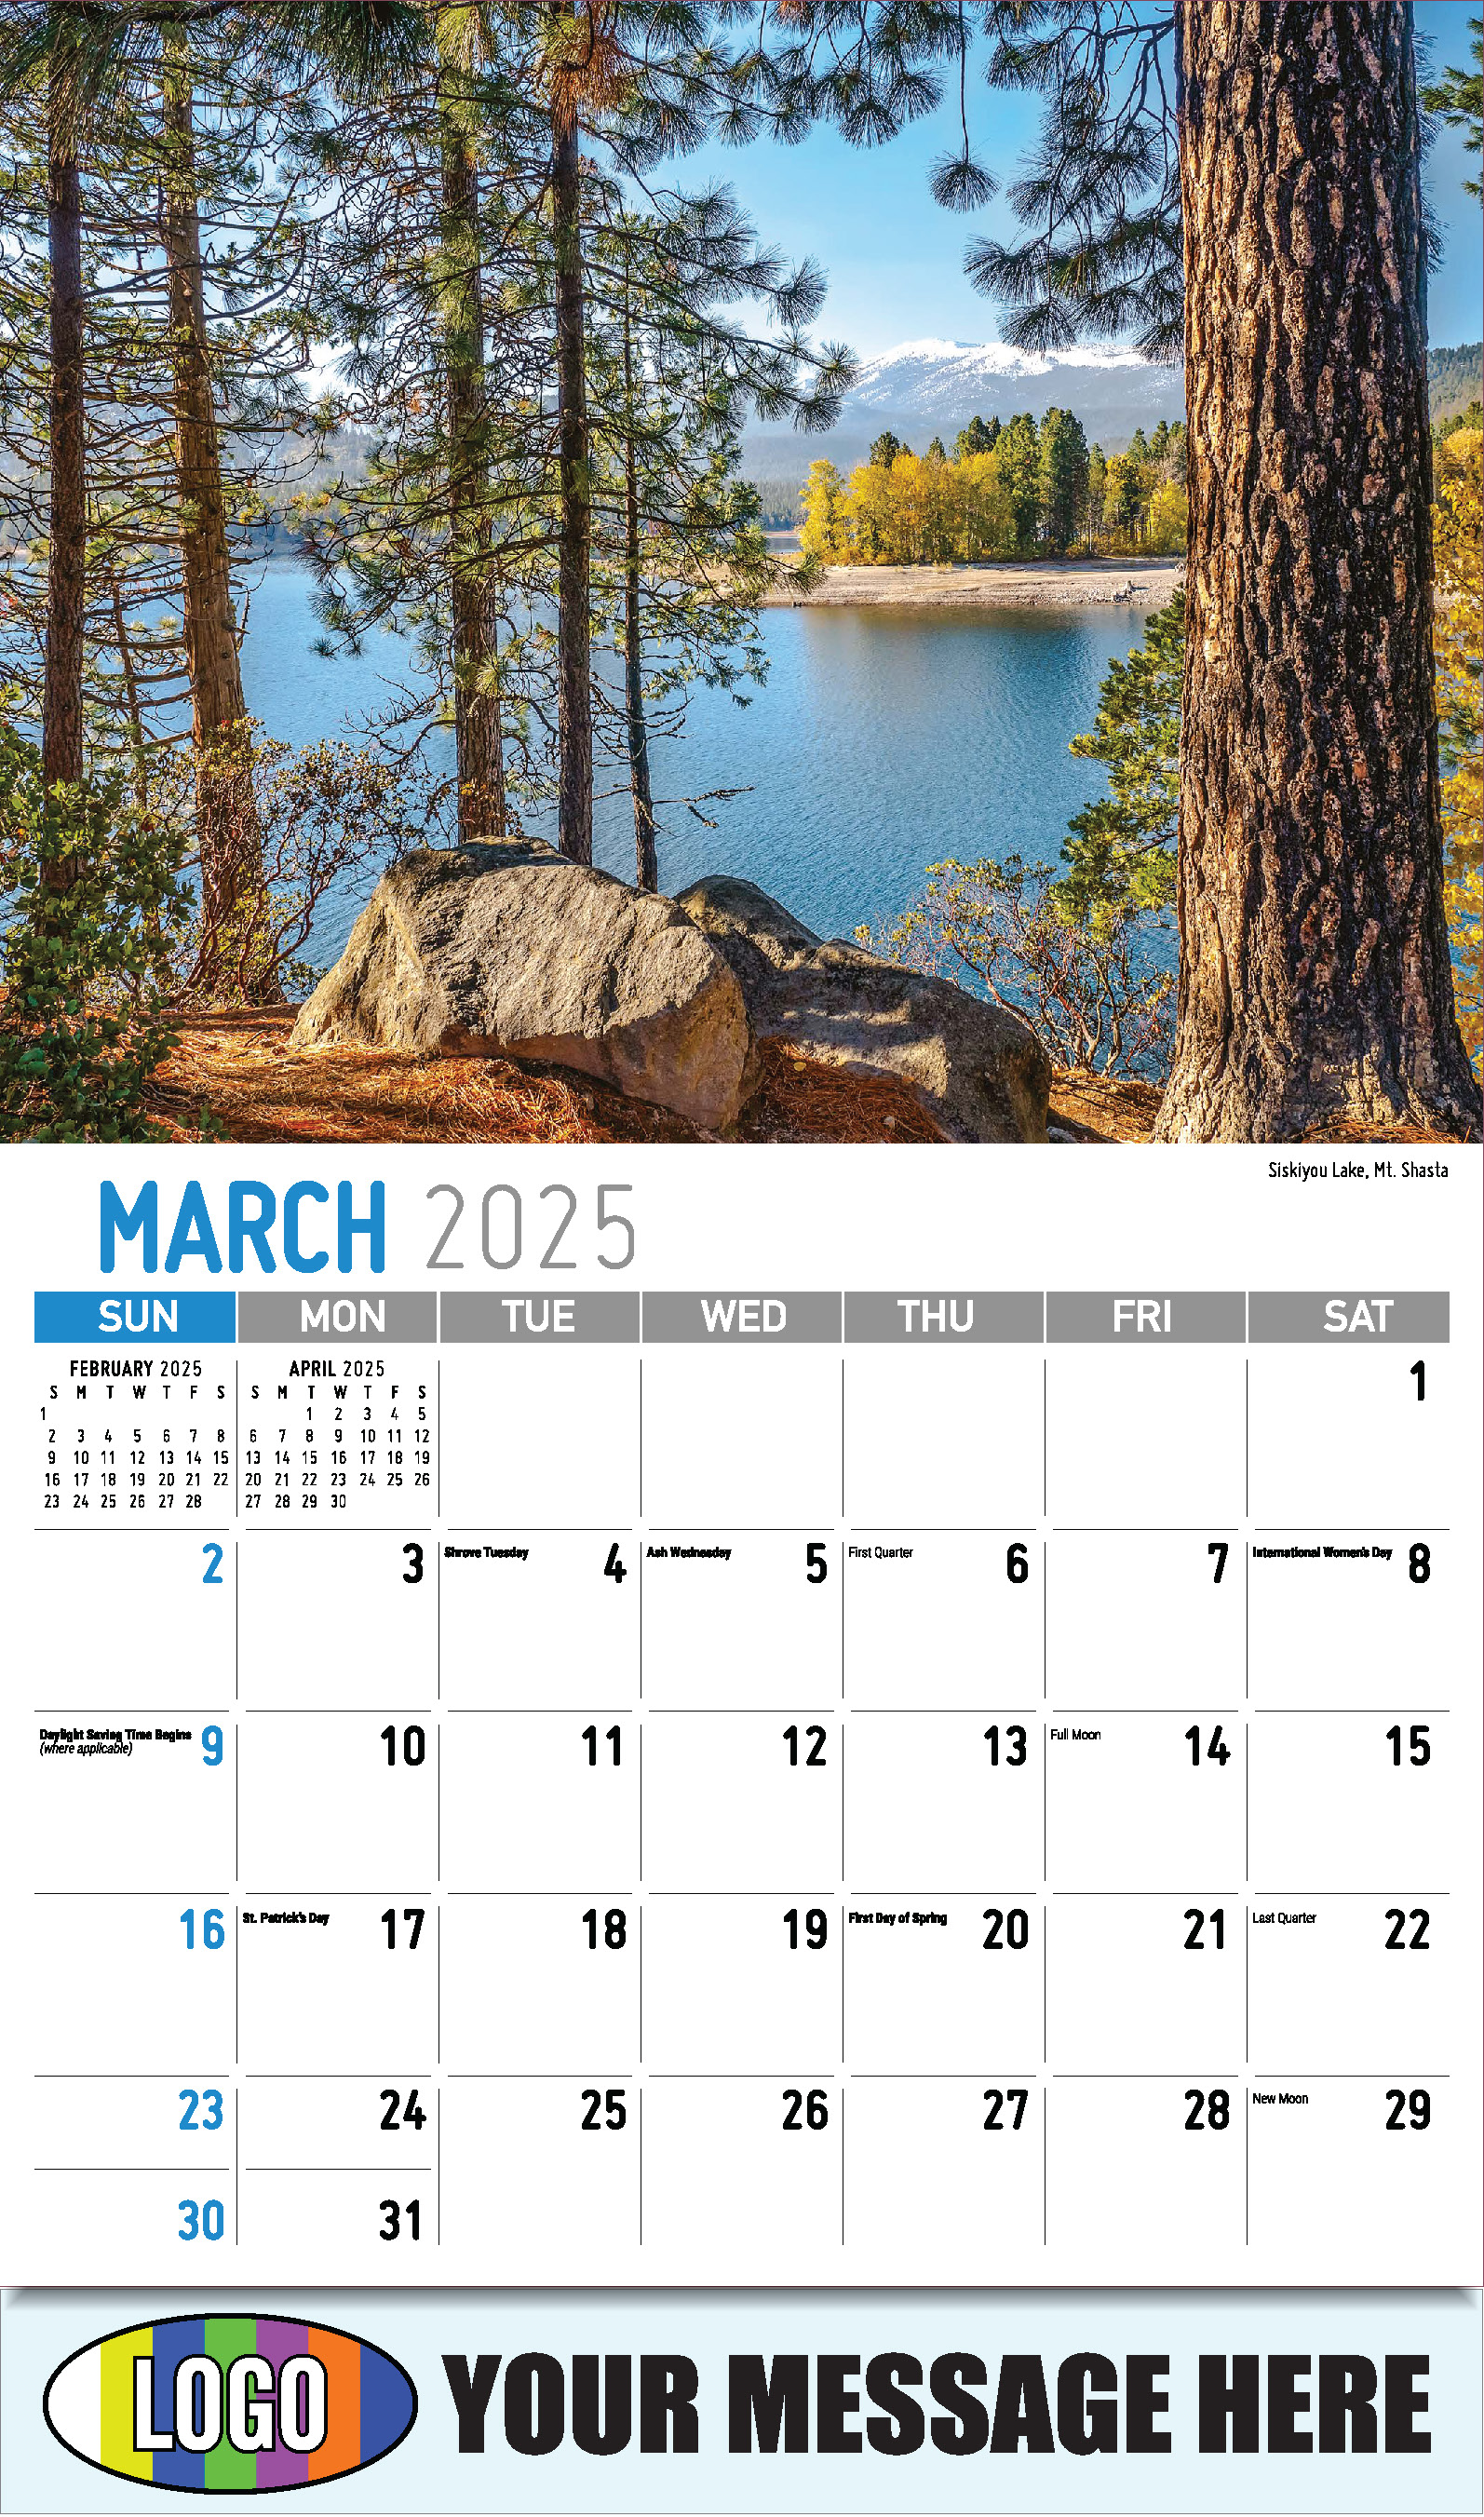 Scenes of California 2025 Business Advertising Wall Calendar - March